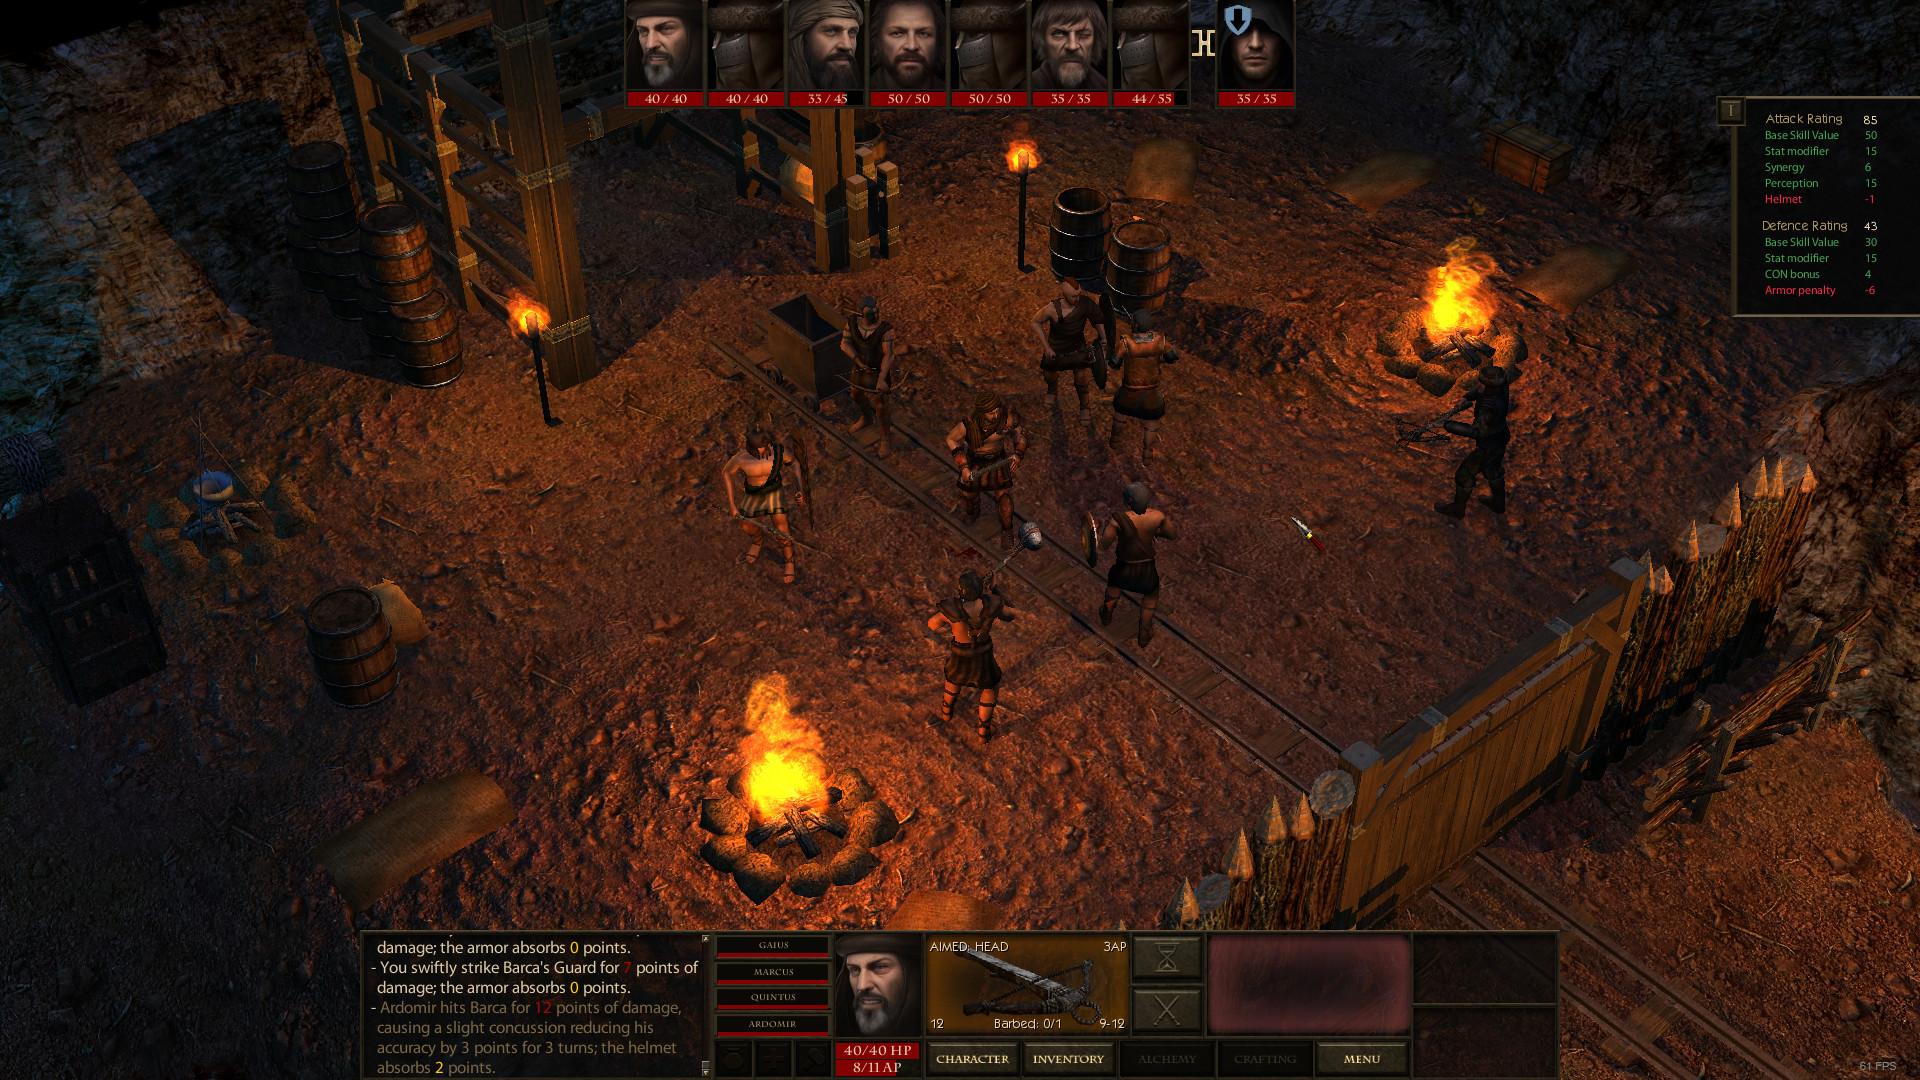 DUNGEON RATS Cracked ( V1.0.6.50 ) With Torrent Free Download